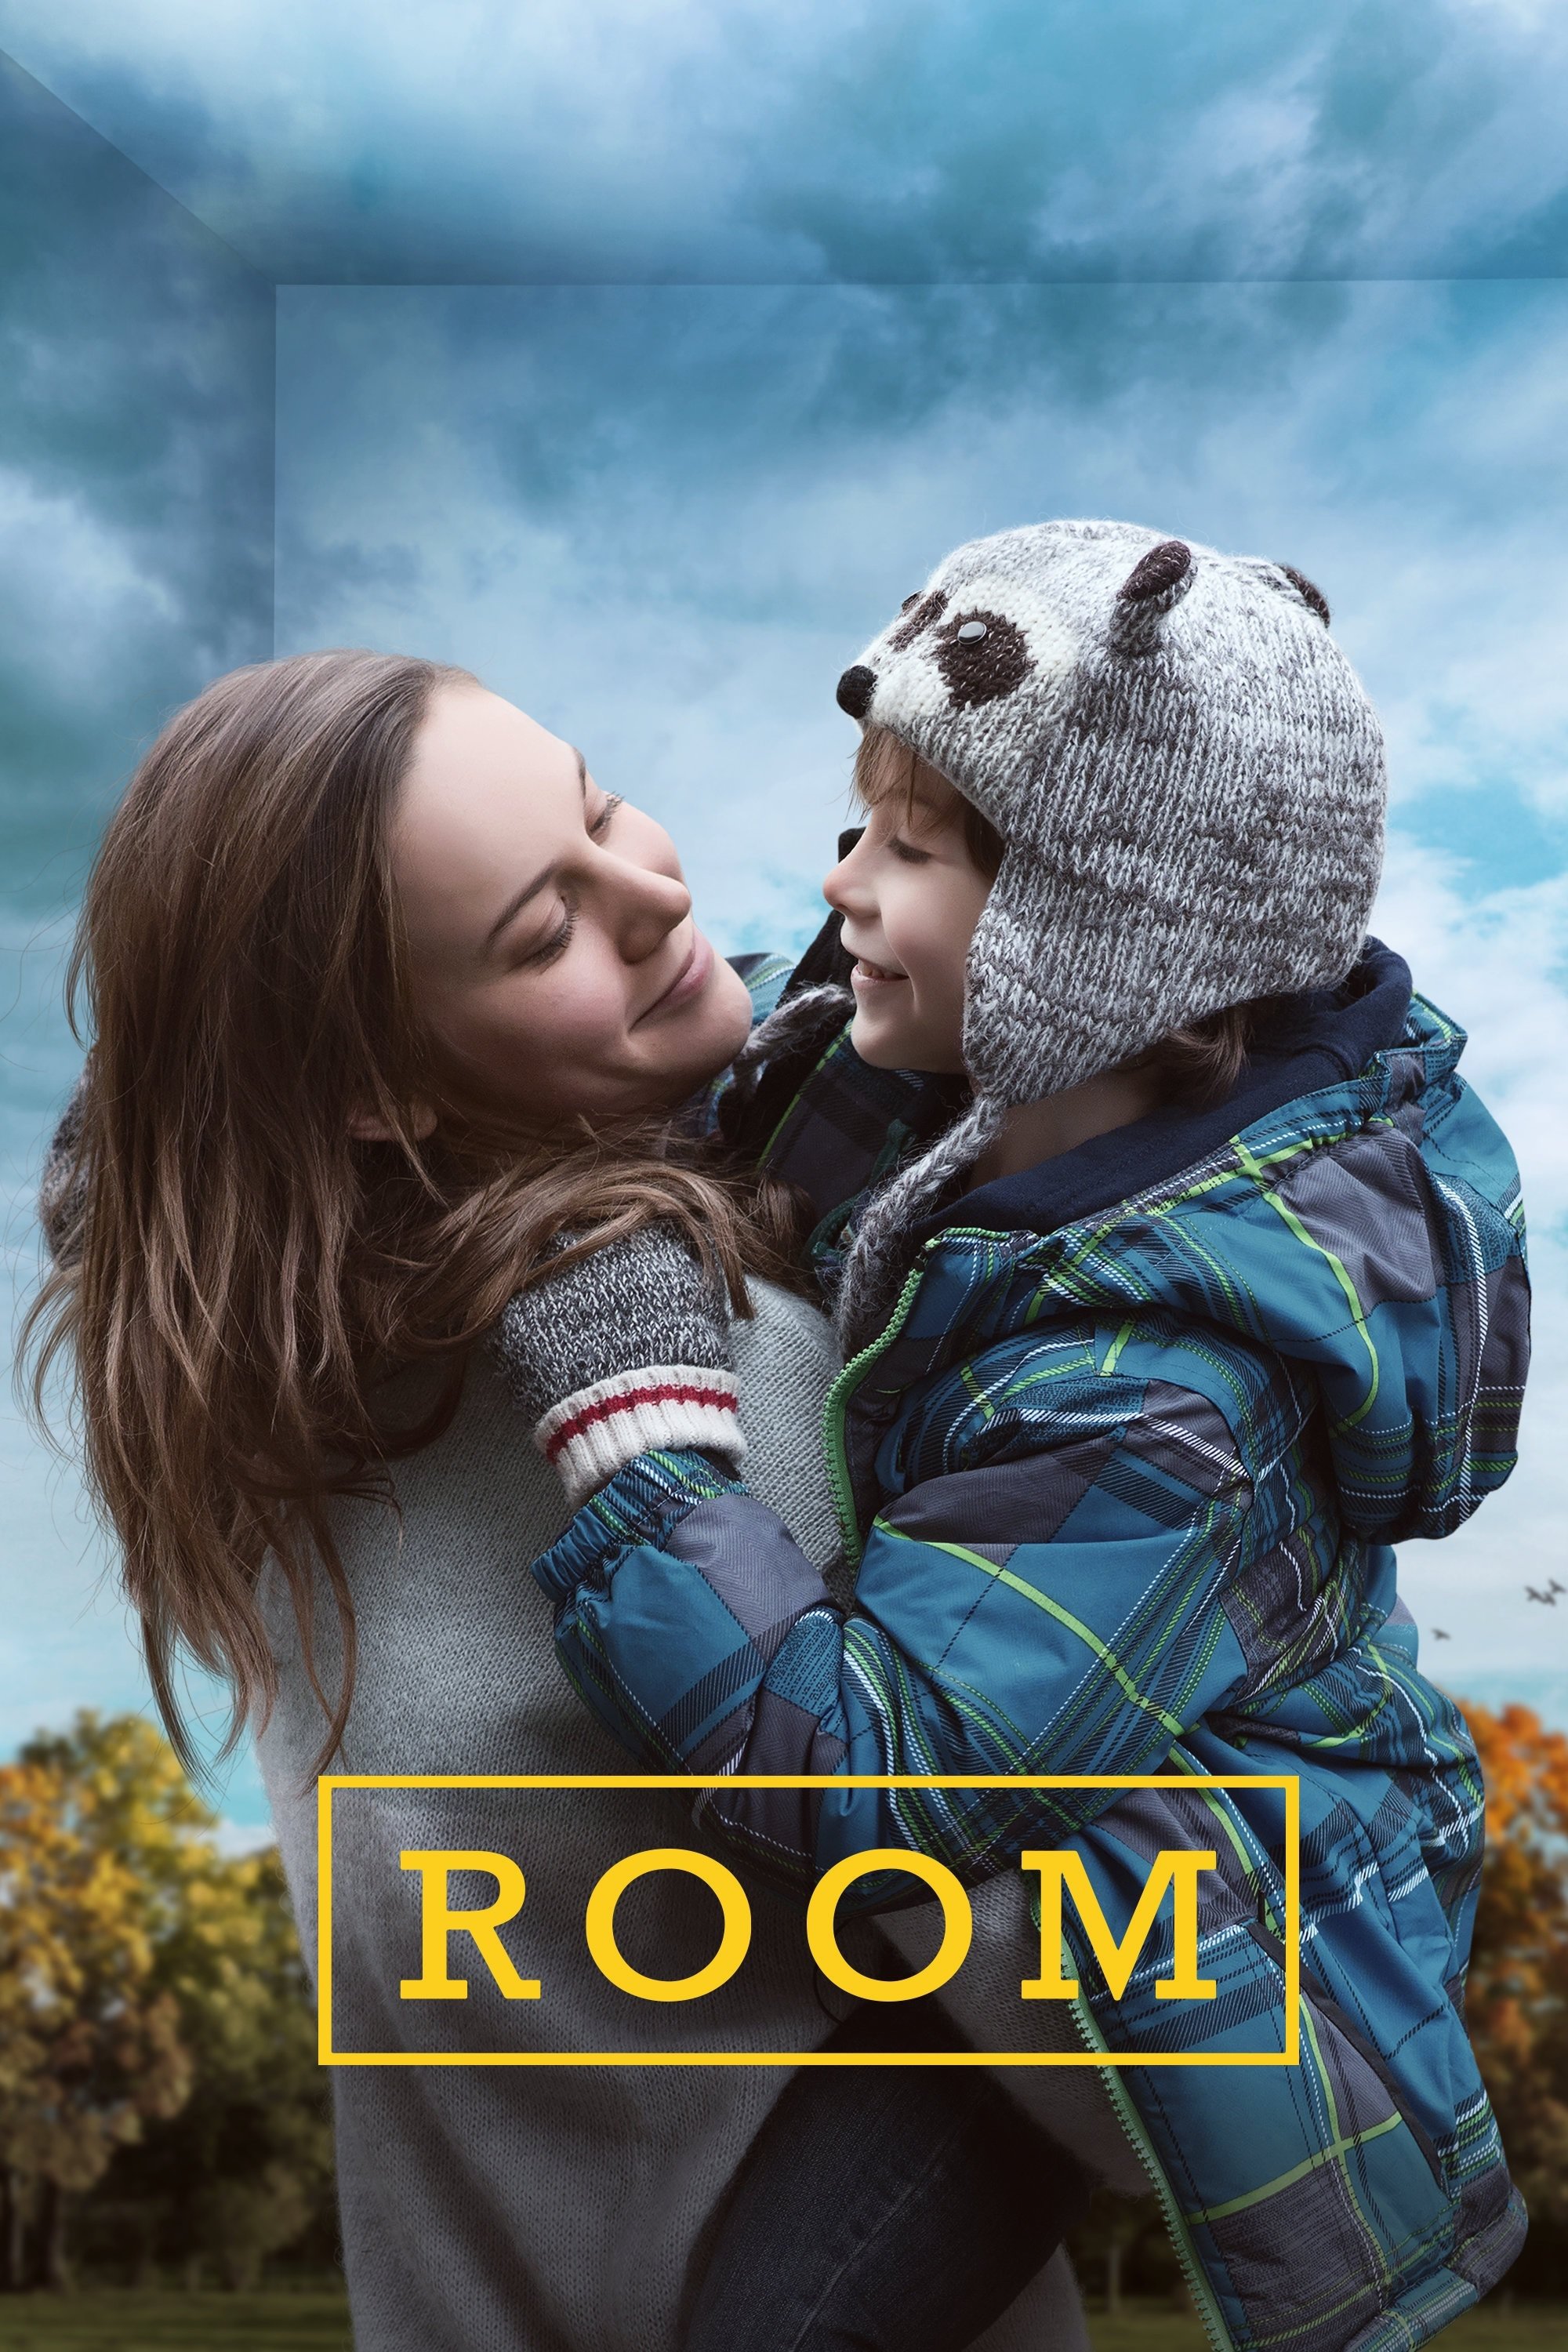 Its Cinema Saturday! The Movie “Room” Is Filled With An Awesome Storyline And Jam-Packed With Amazing Actors.